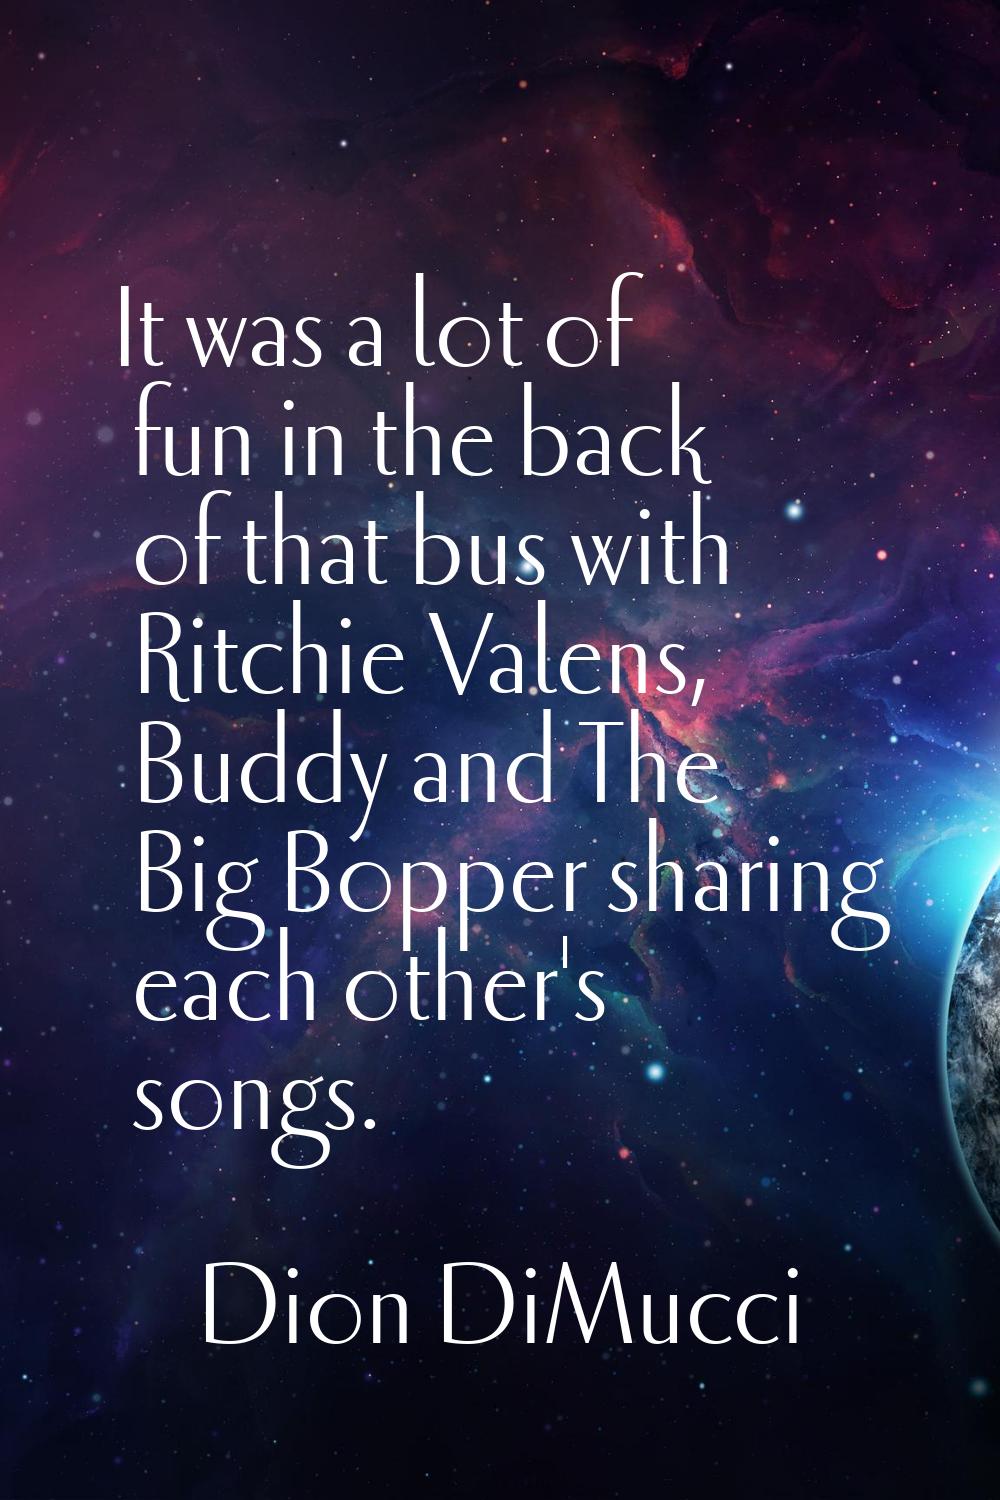 It was a lot of fun in the back of that bus with Ritchie Valens, Buddy and The Big Bopper sharing e